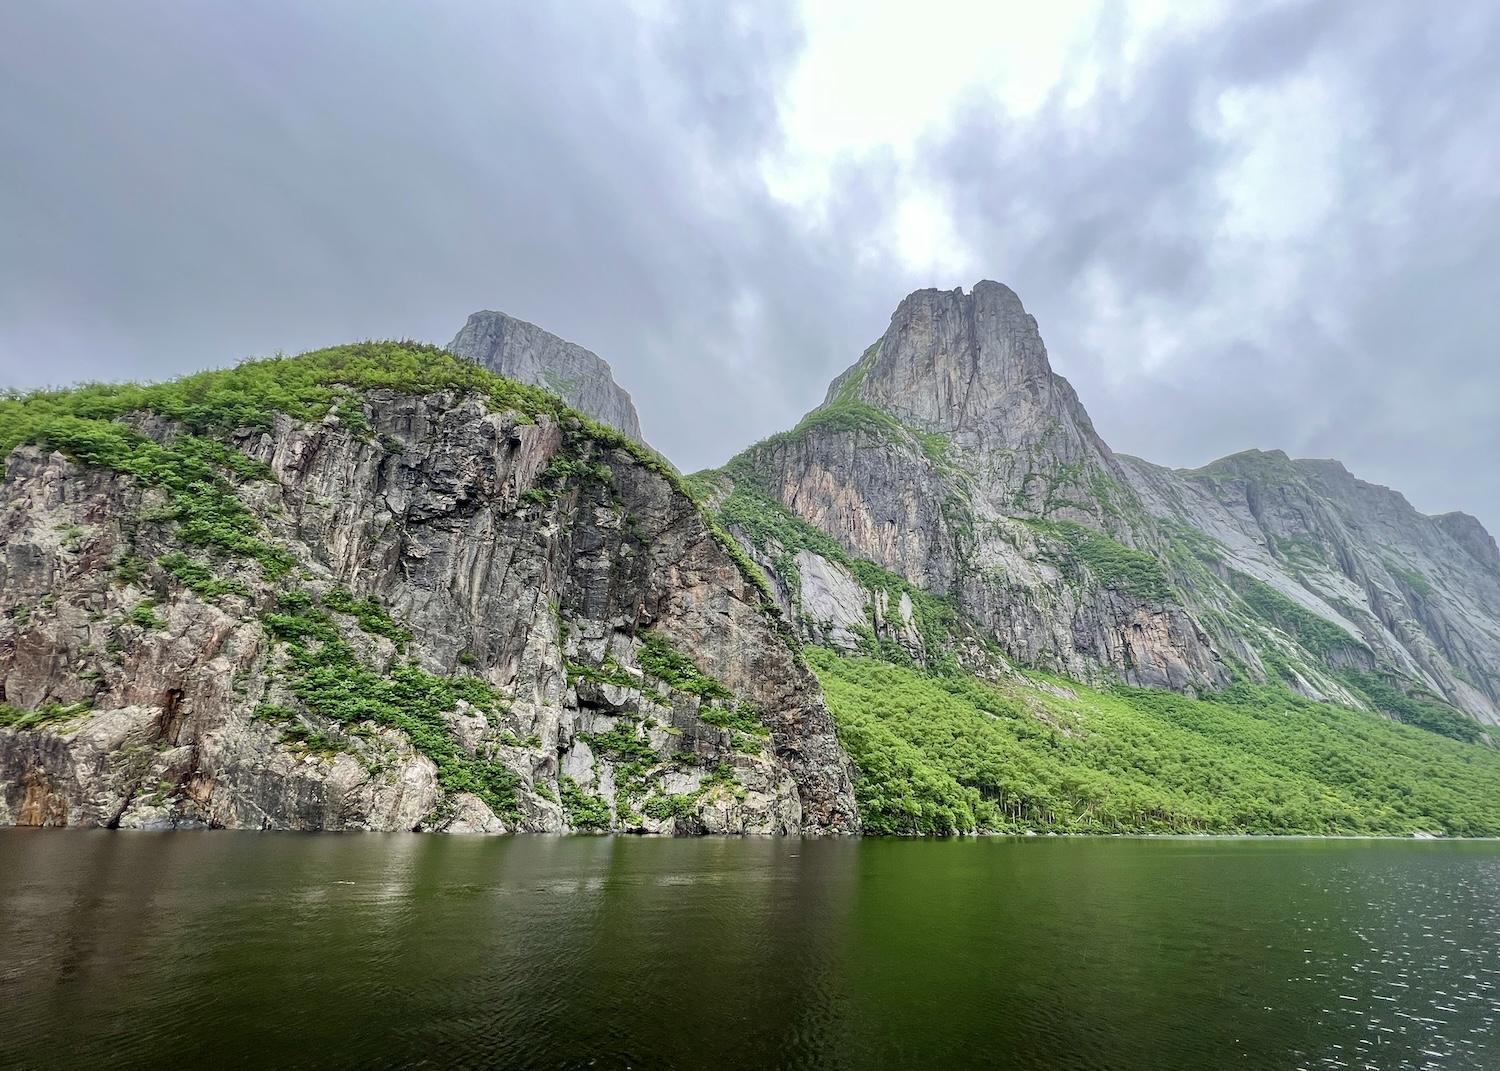 A view from a boat tour of some of the cliffs along Western Brook Pond.